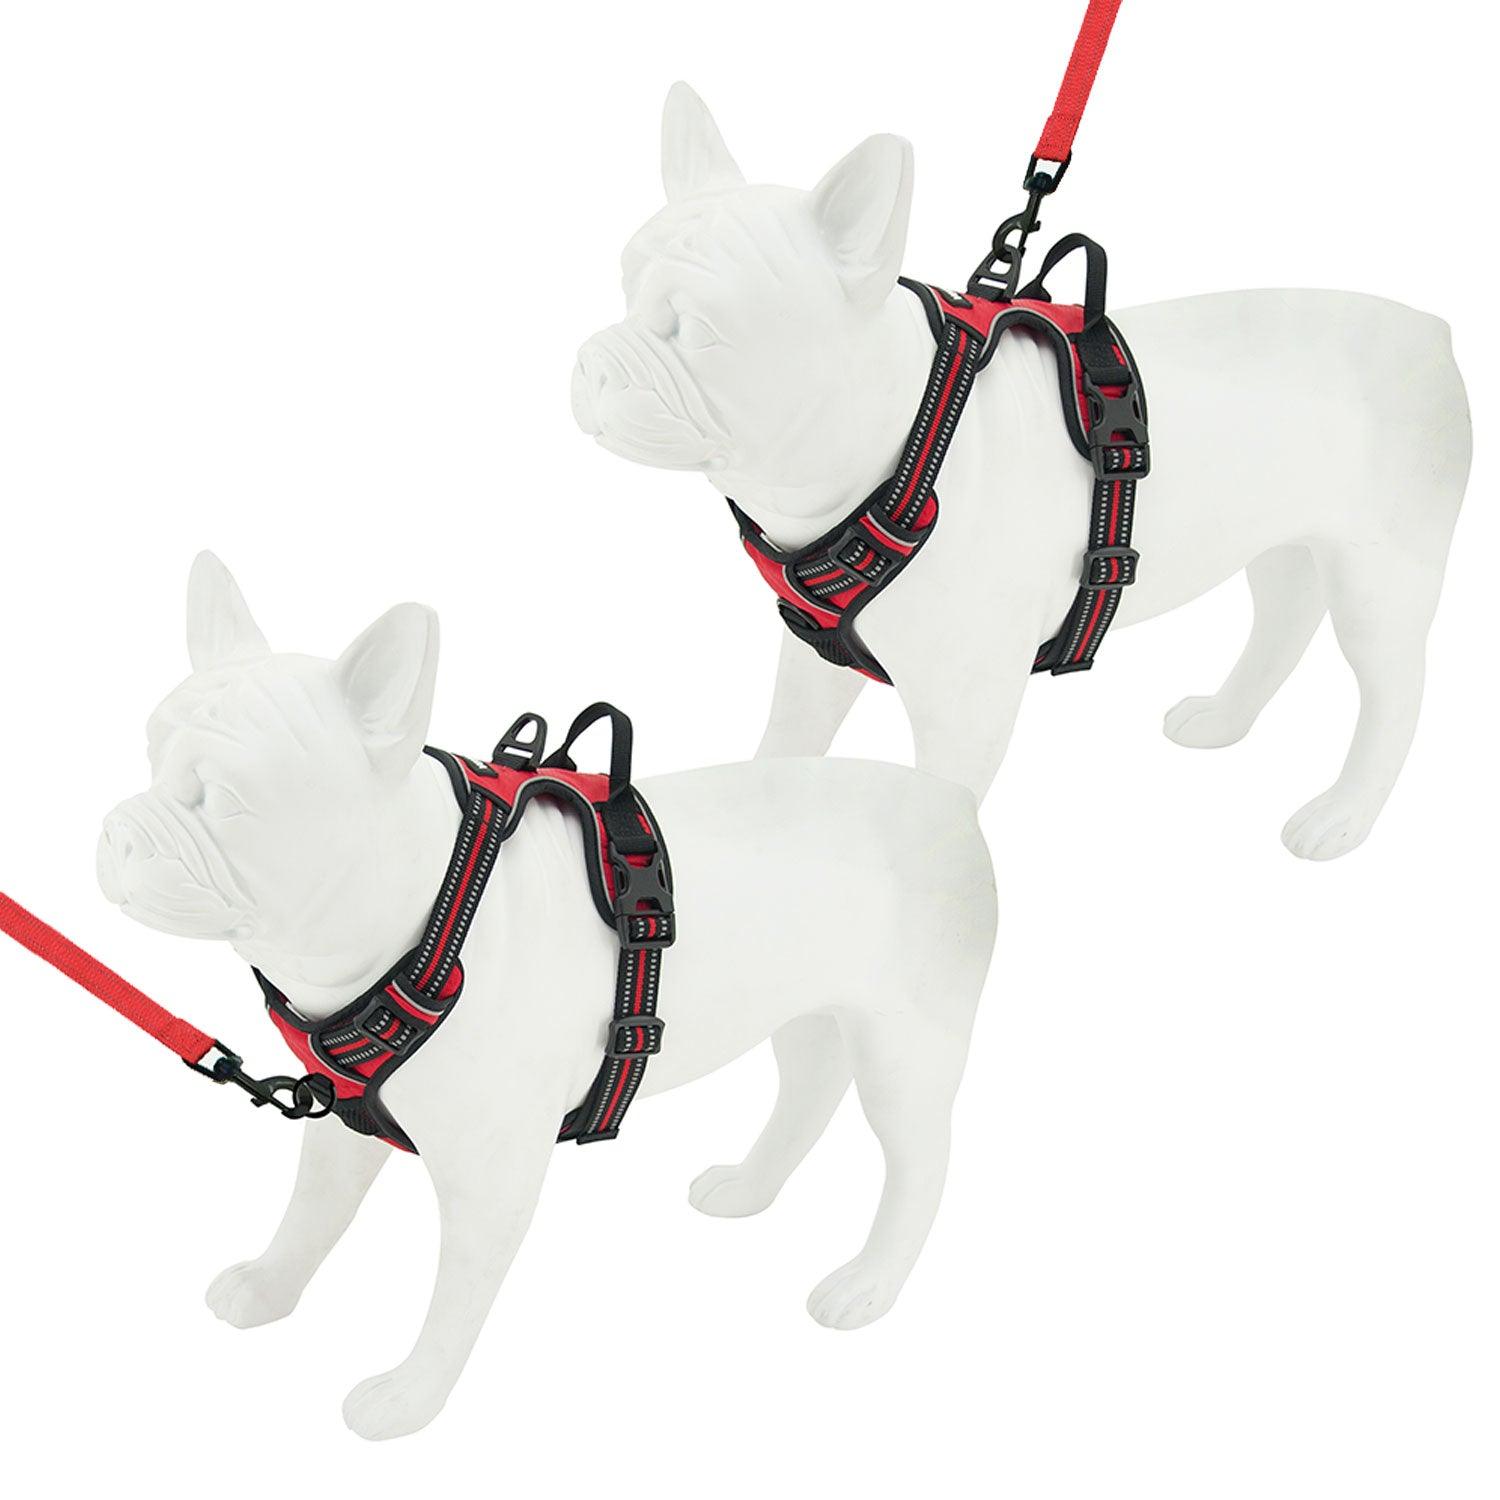 Voyager Dog Harness Dual Leash Attachment No-Pull Control Adjustable Soft But Strong Pet Harness for Medium and Large Dogs with 3M Reflective